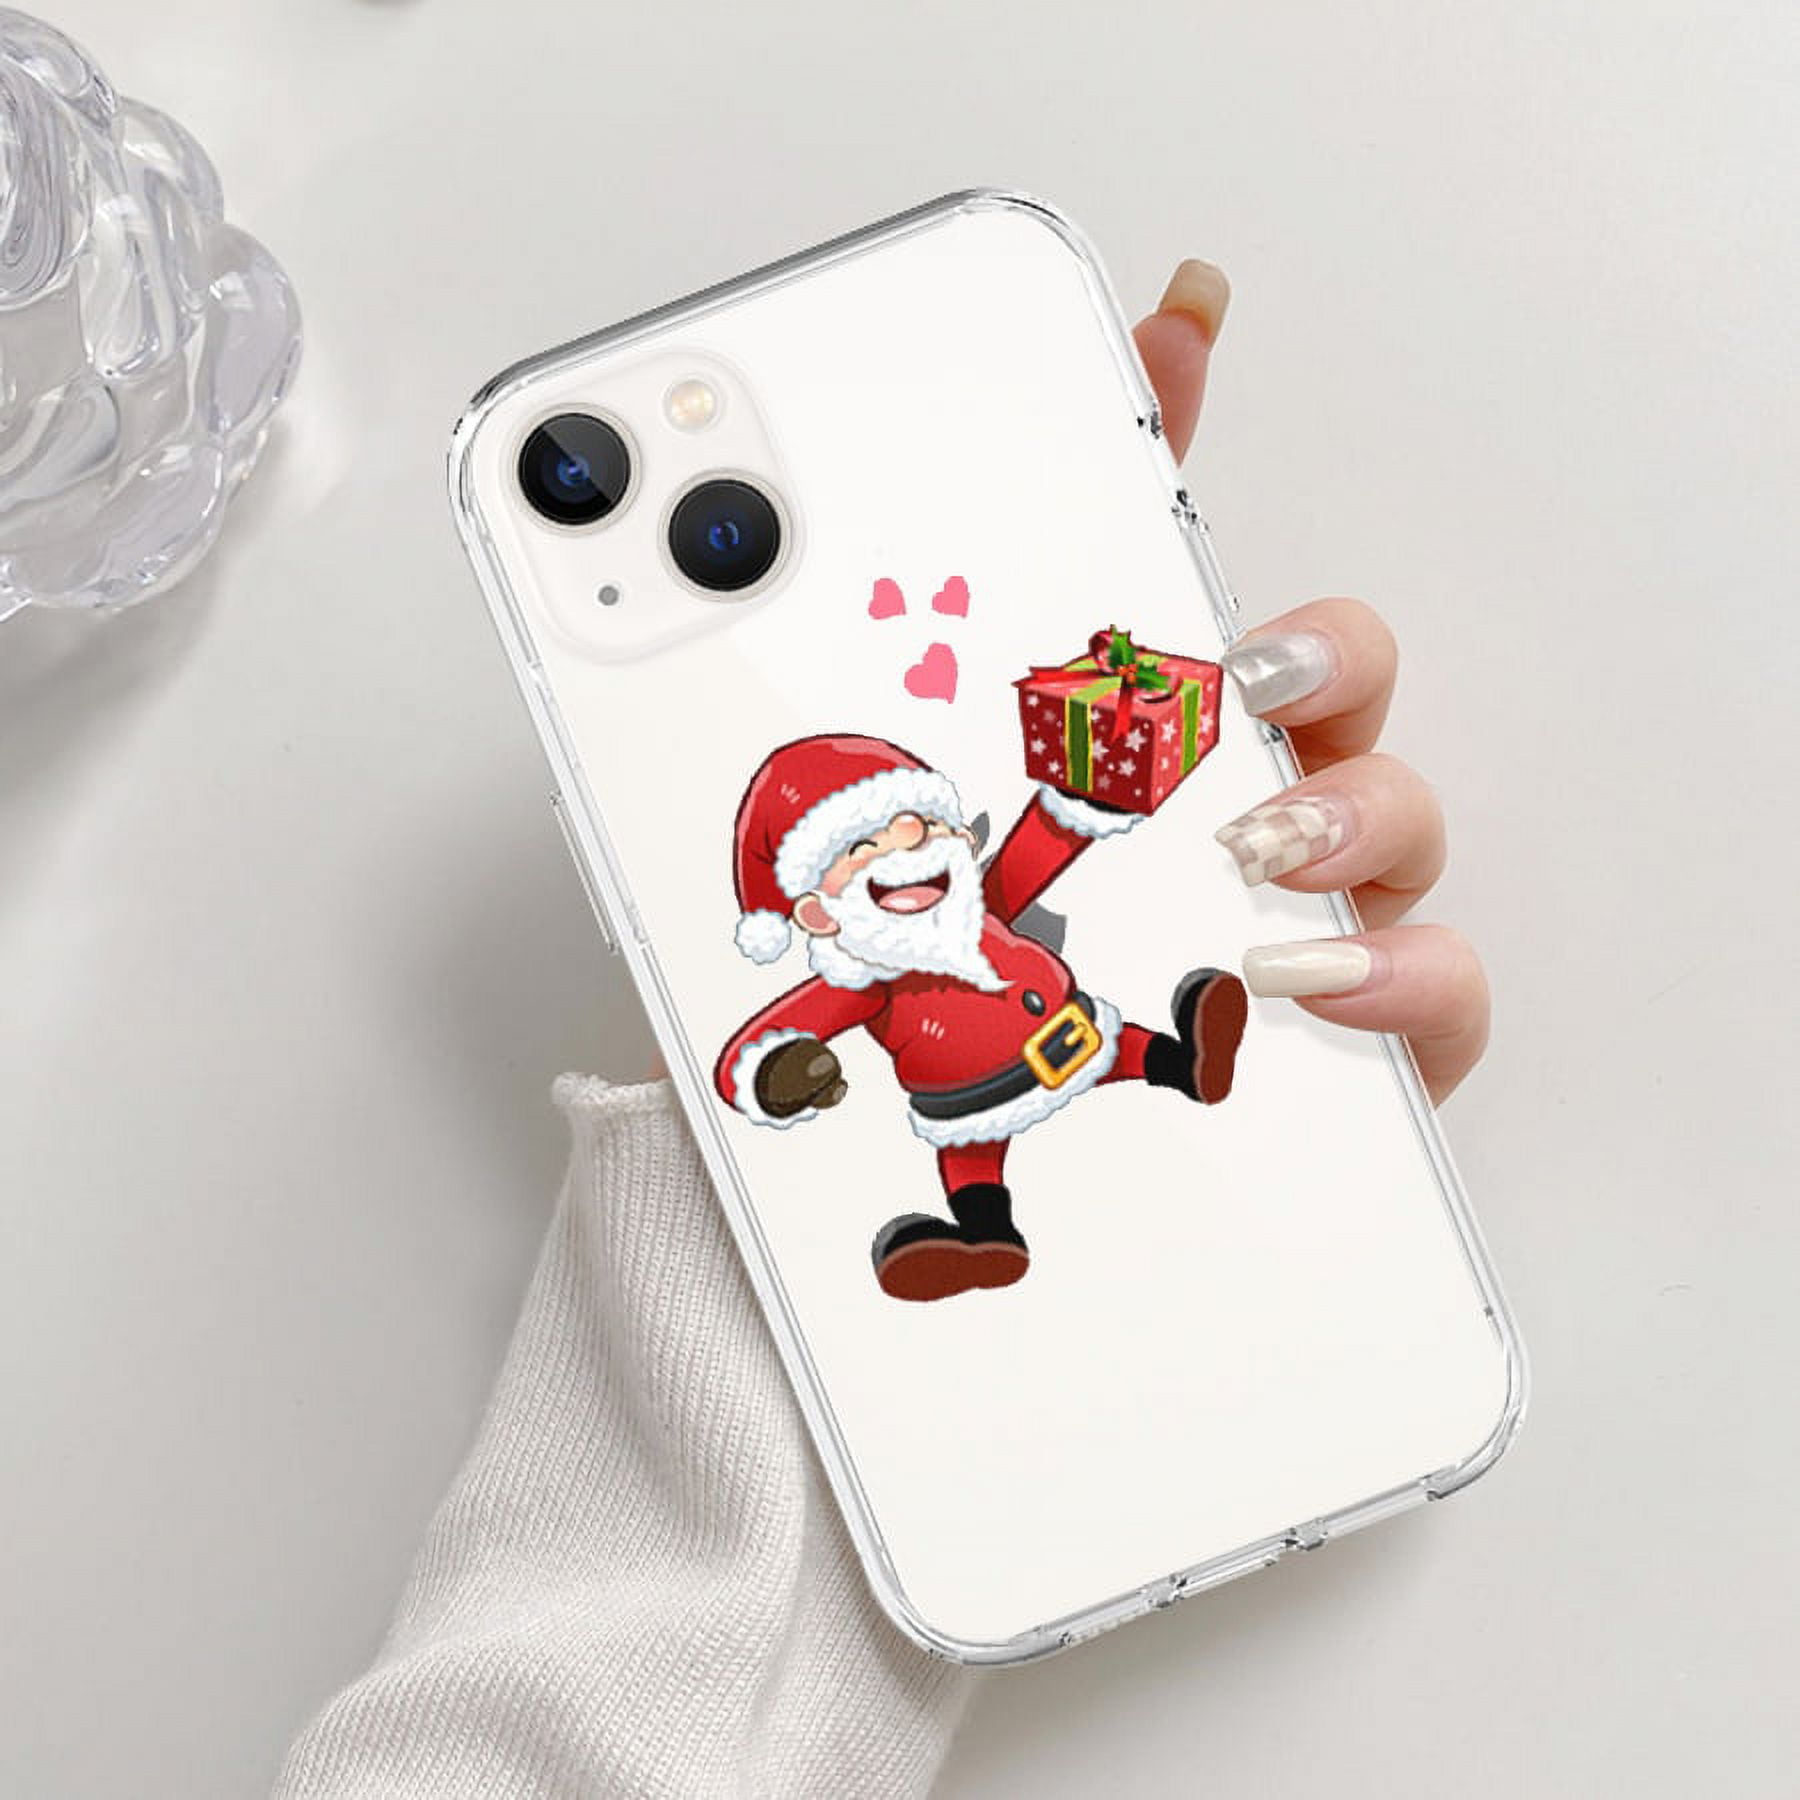 For aesthetic iphone case/iphone case 12 pro/case iphone 13 pro max /phone  case iphone 11/12 mini phone case/christmas phone case/iphone 11 pro max  phone case/iphone case 